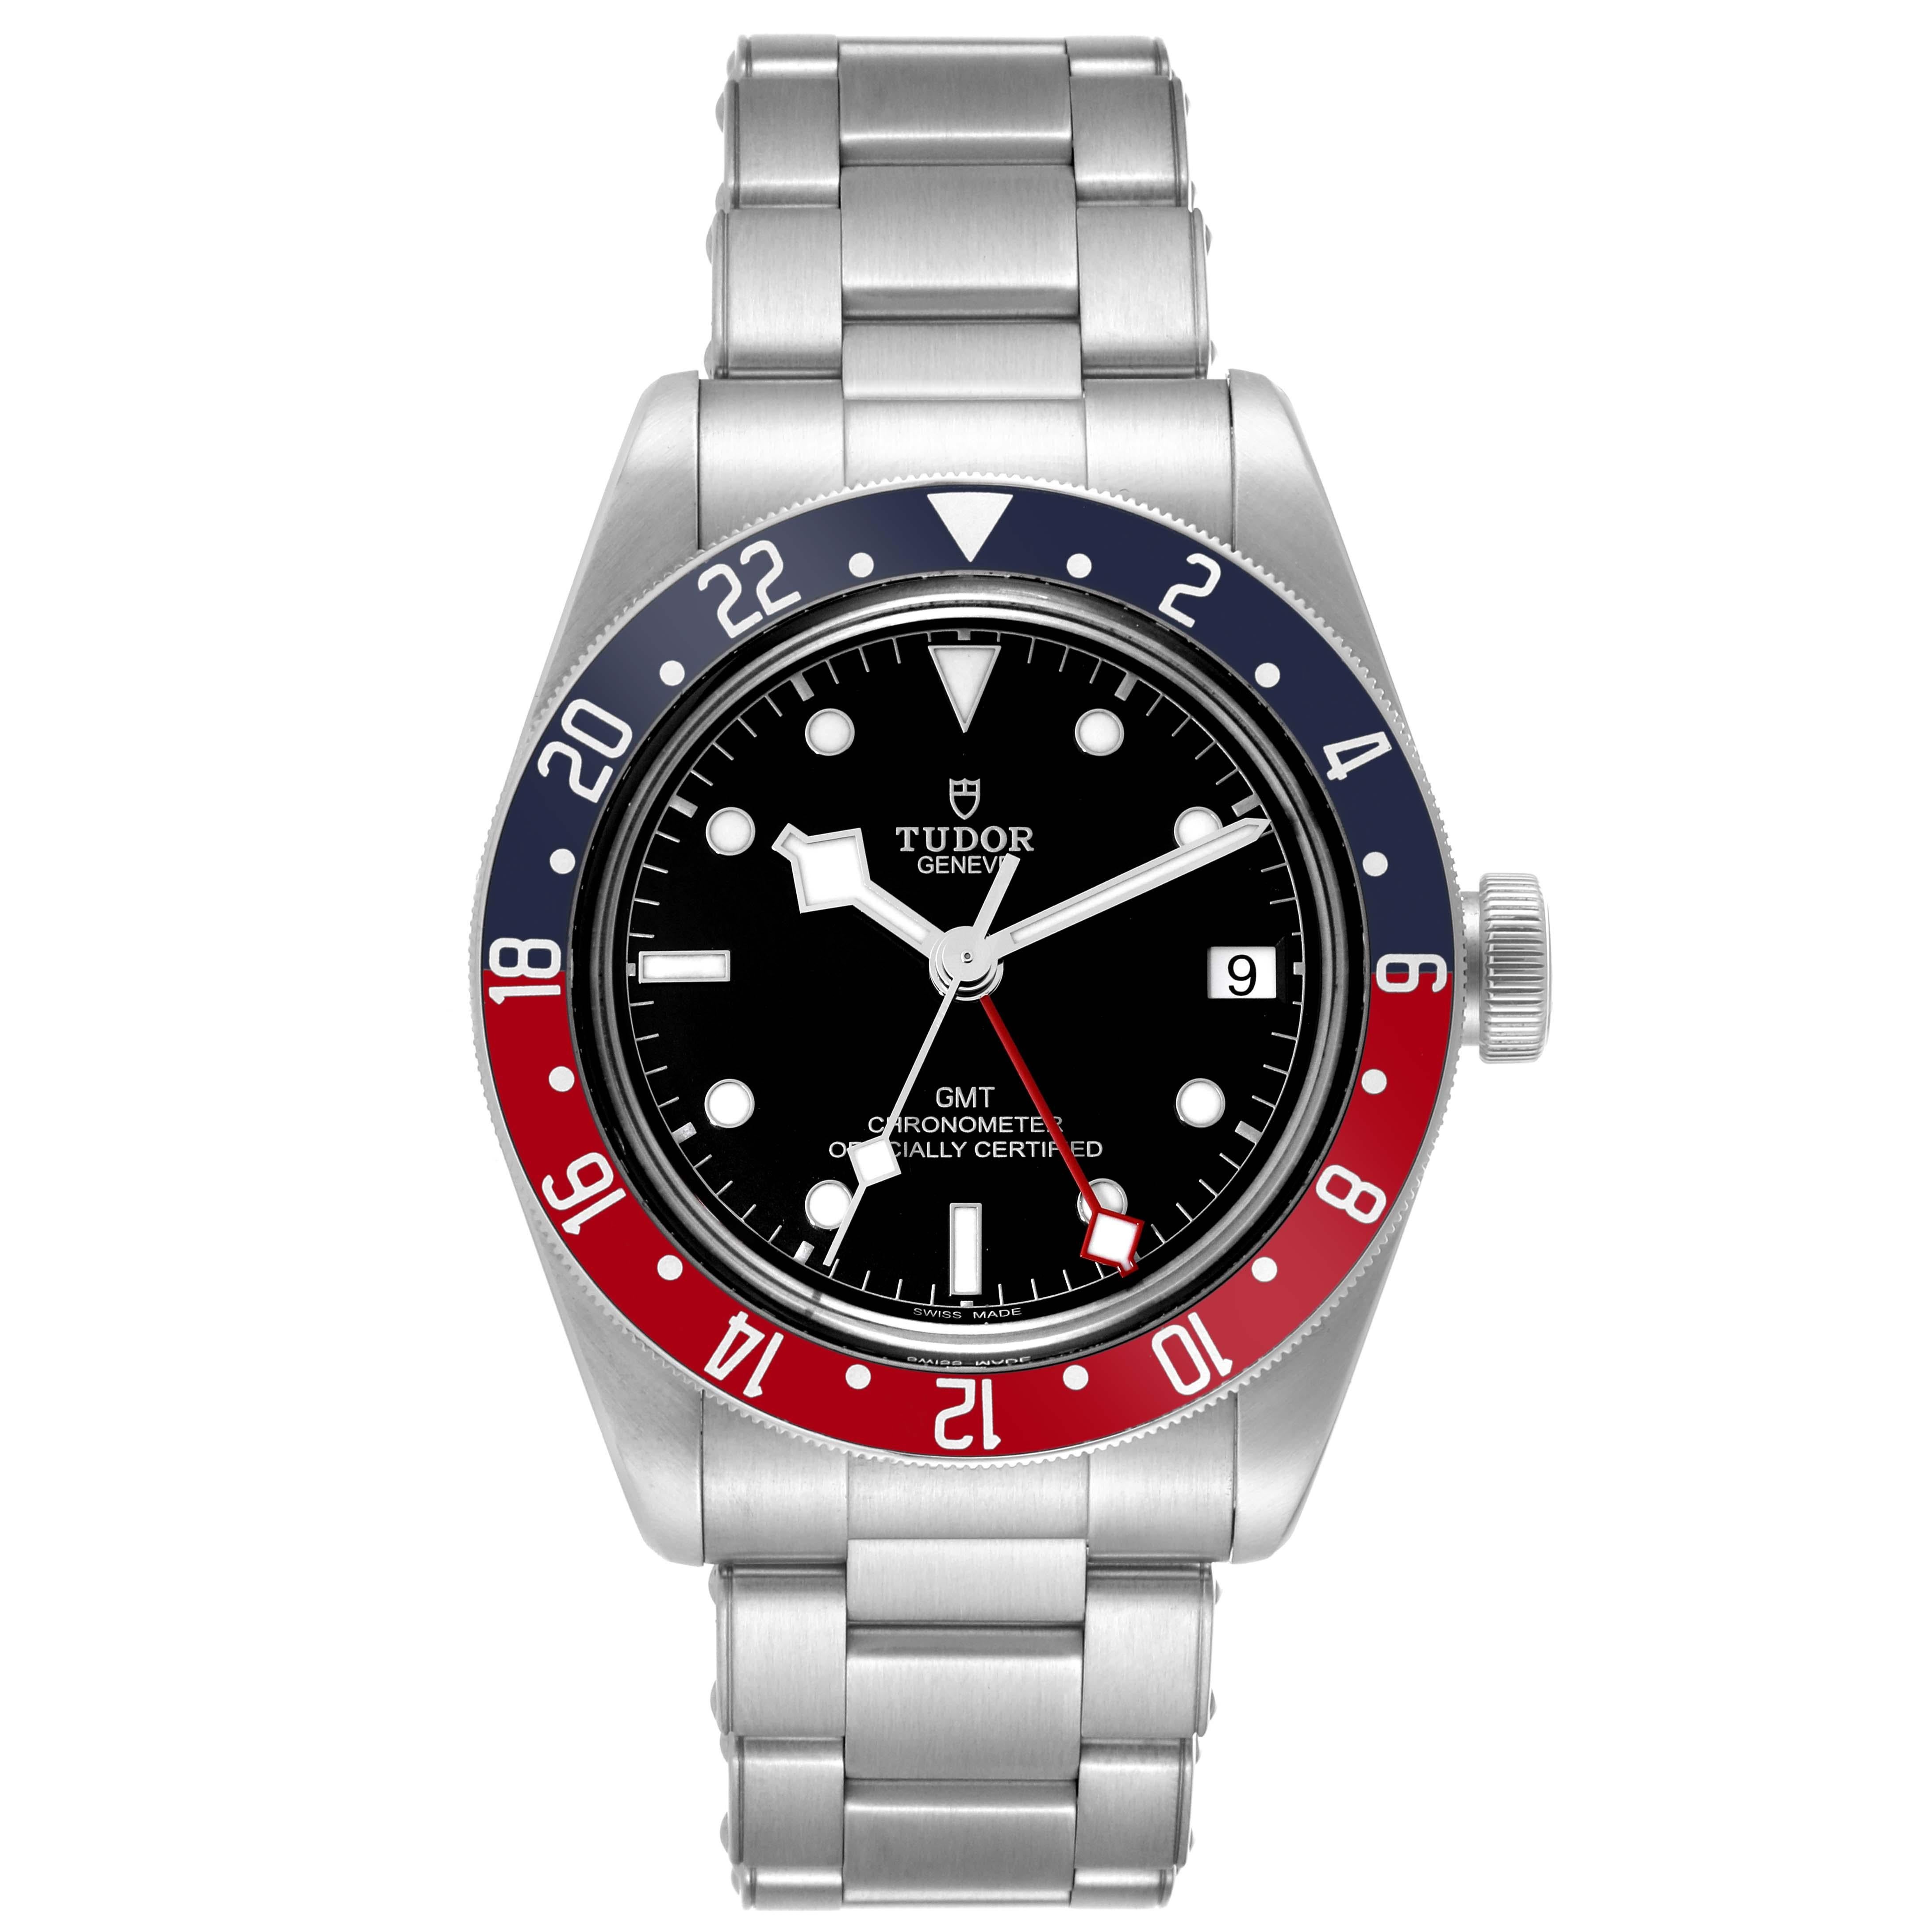 Tudor Heritage Black Bay GMT Pepsi Bezel Steel Mens Watch 79830RB Box Card. Automatic self-winding movement. Stainless steel oyster case 41.0 mm in diameter. Tudor logo on a crown. Bidirectional rotating red and blue (Pepsi) bezel. Scratch resistant